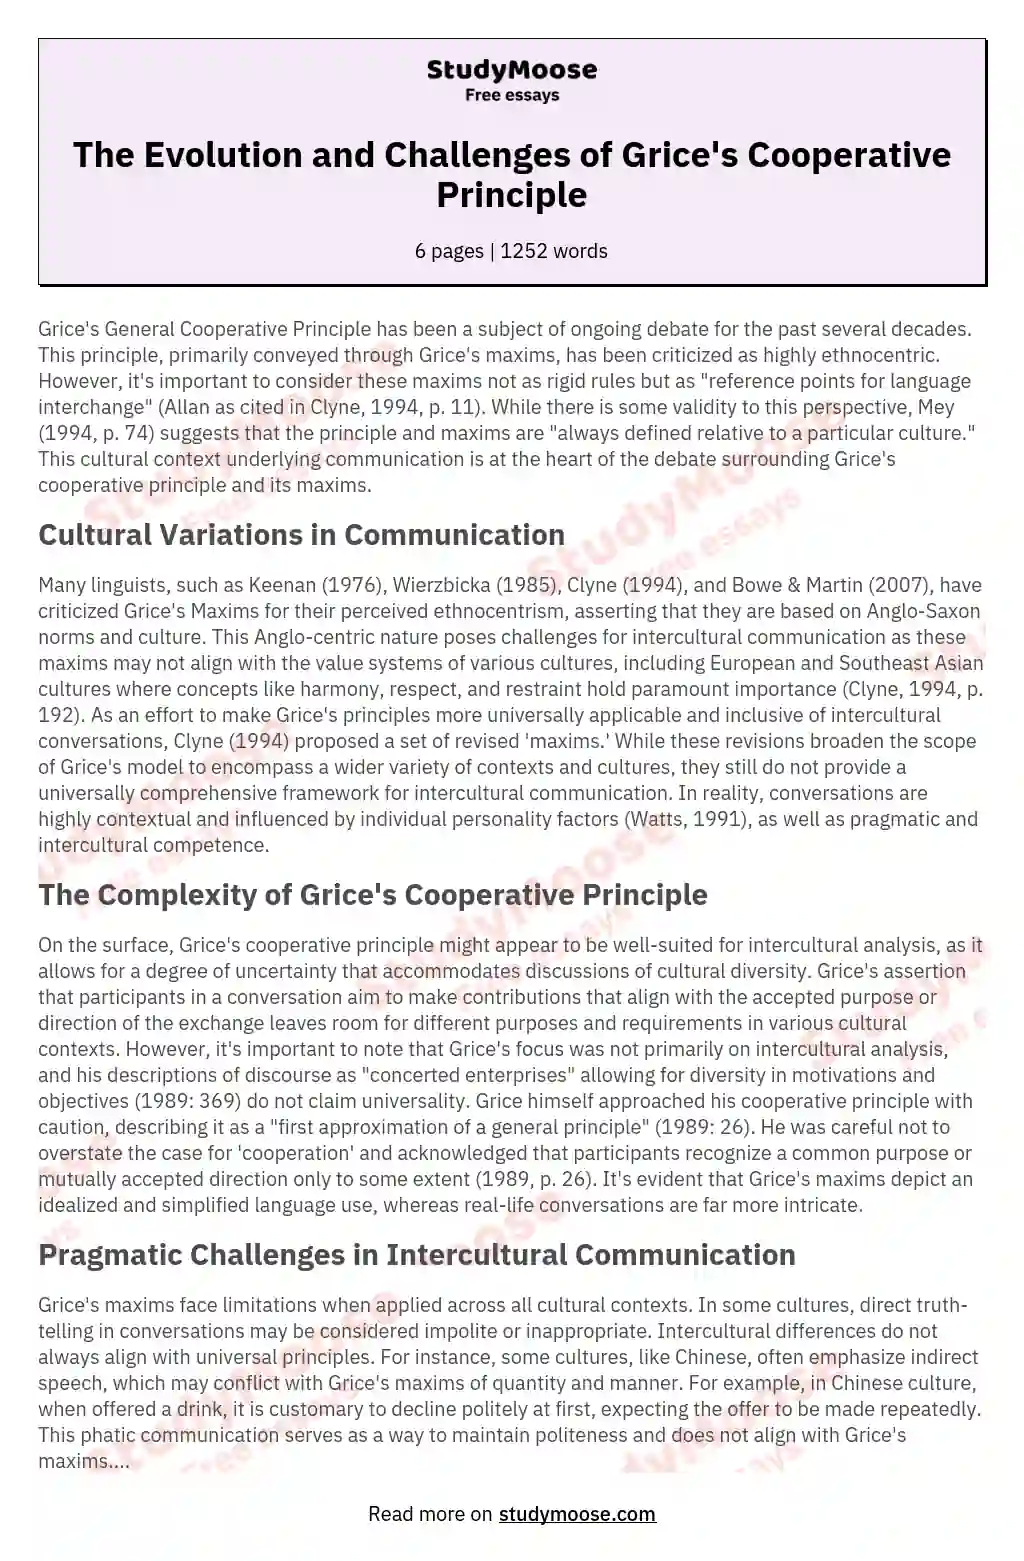 The Evolution and Challenges of Grice's Cooperative Principle essay